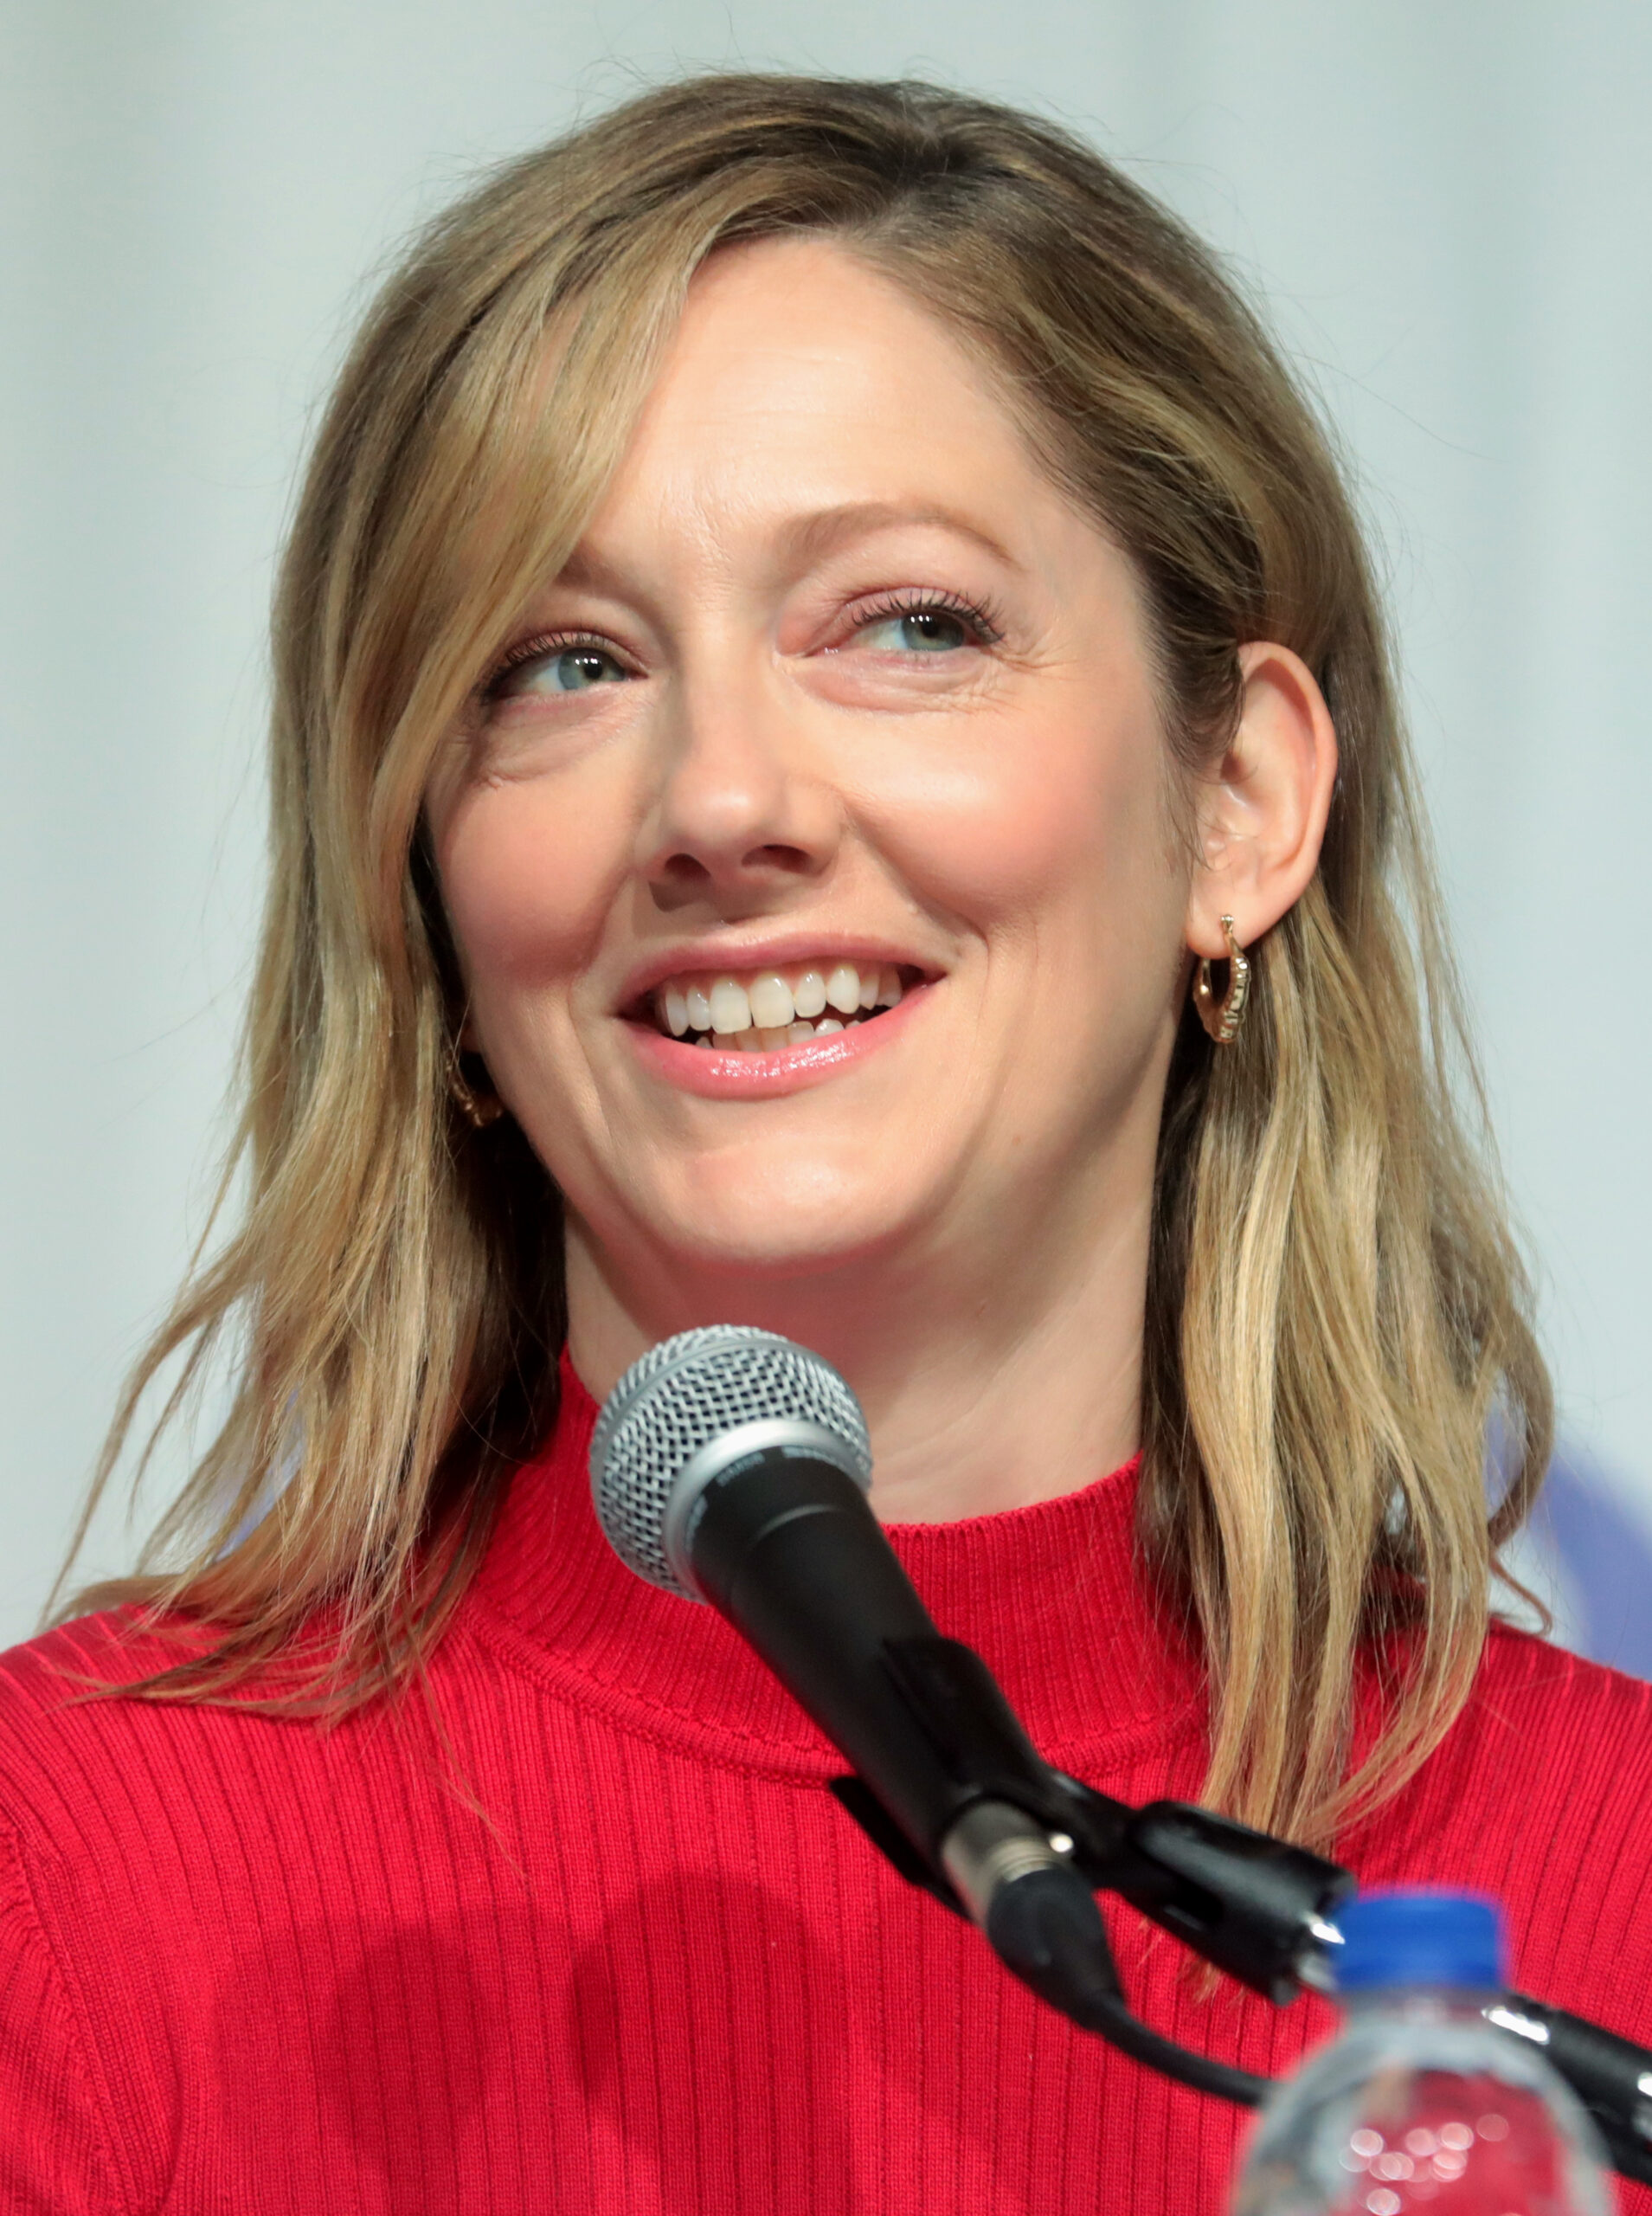 Does Judy Greer Have A Child With Dean E. Johnsen? Judy Greer Describes Her Experience As A Step Mother